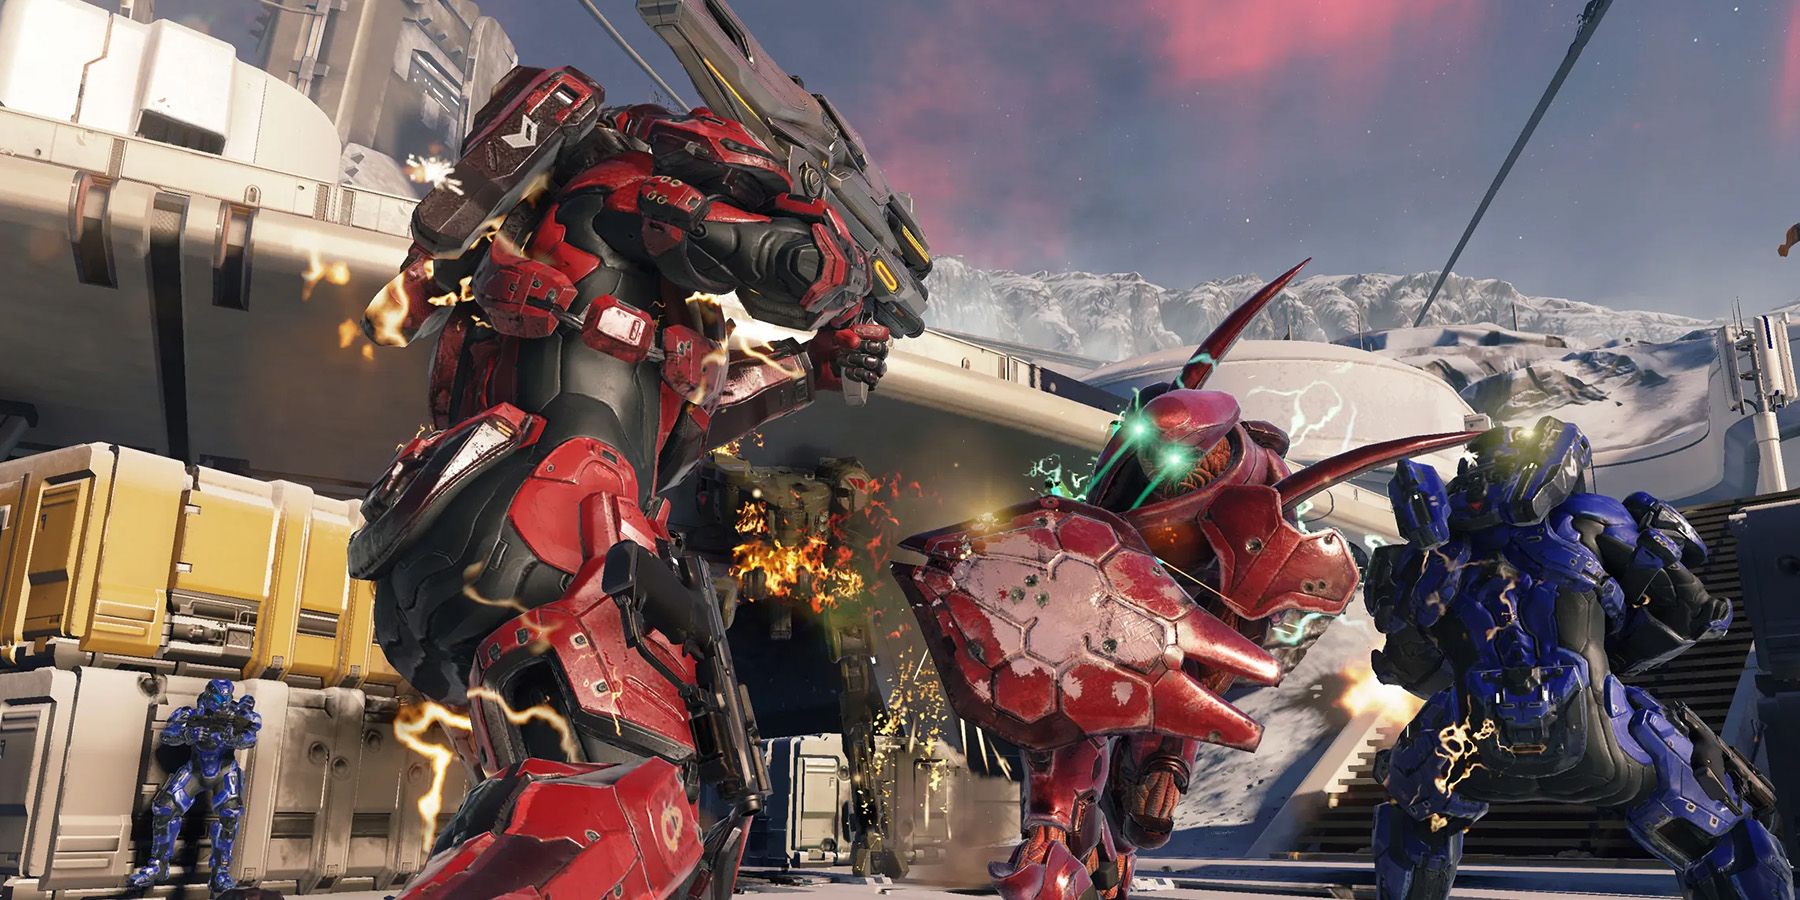 First Look at Warzone Firefight in Halo 5: Guardians - Xbox Wire